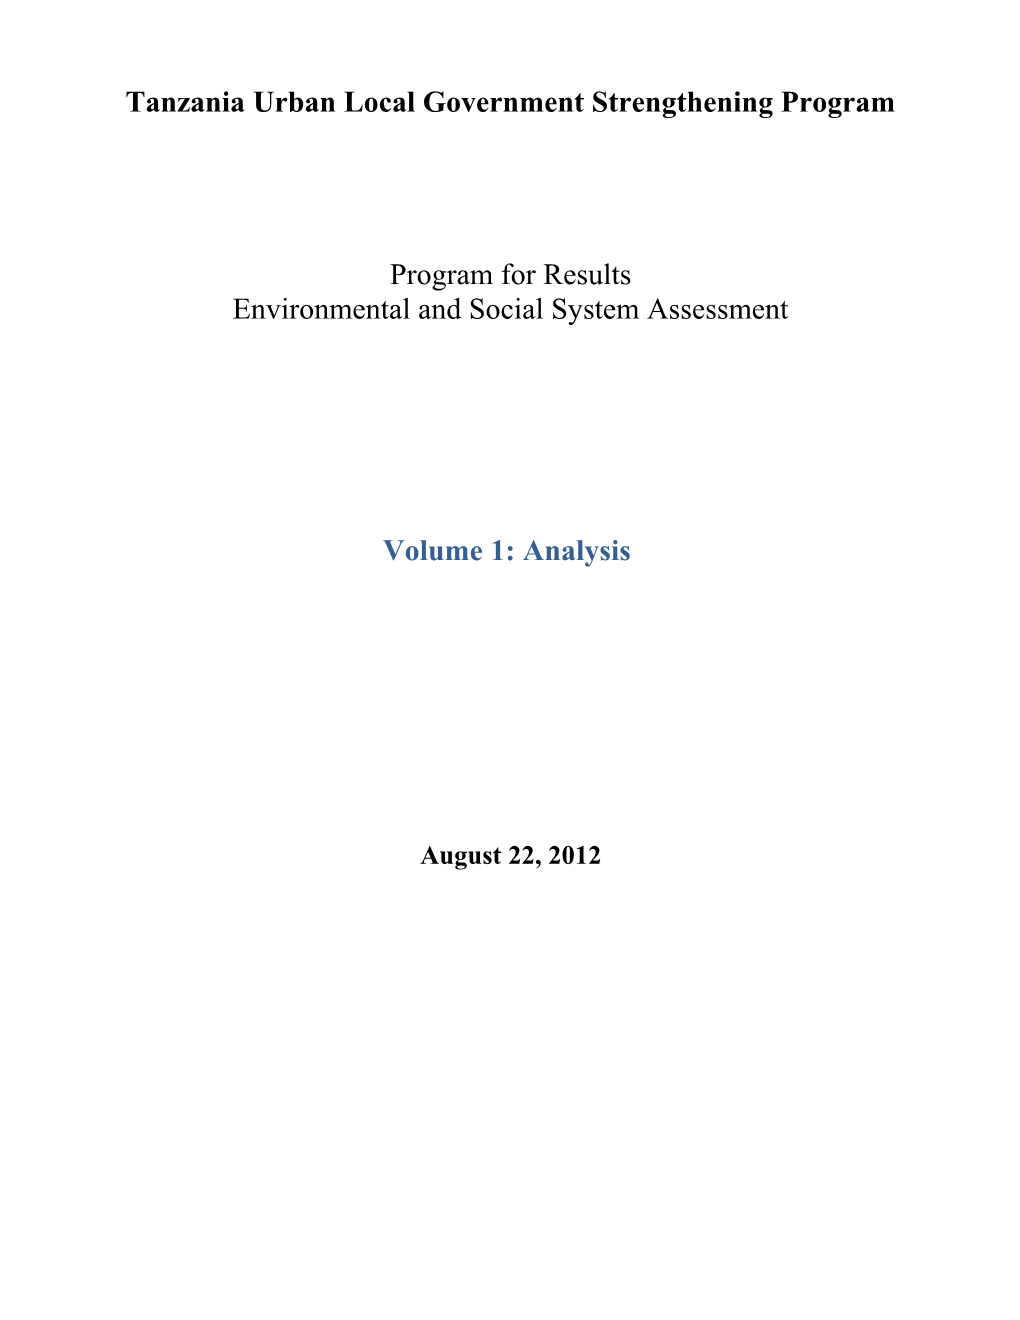 Environmental and Social System Assessment